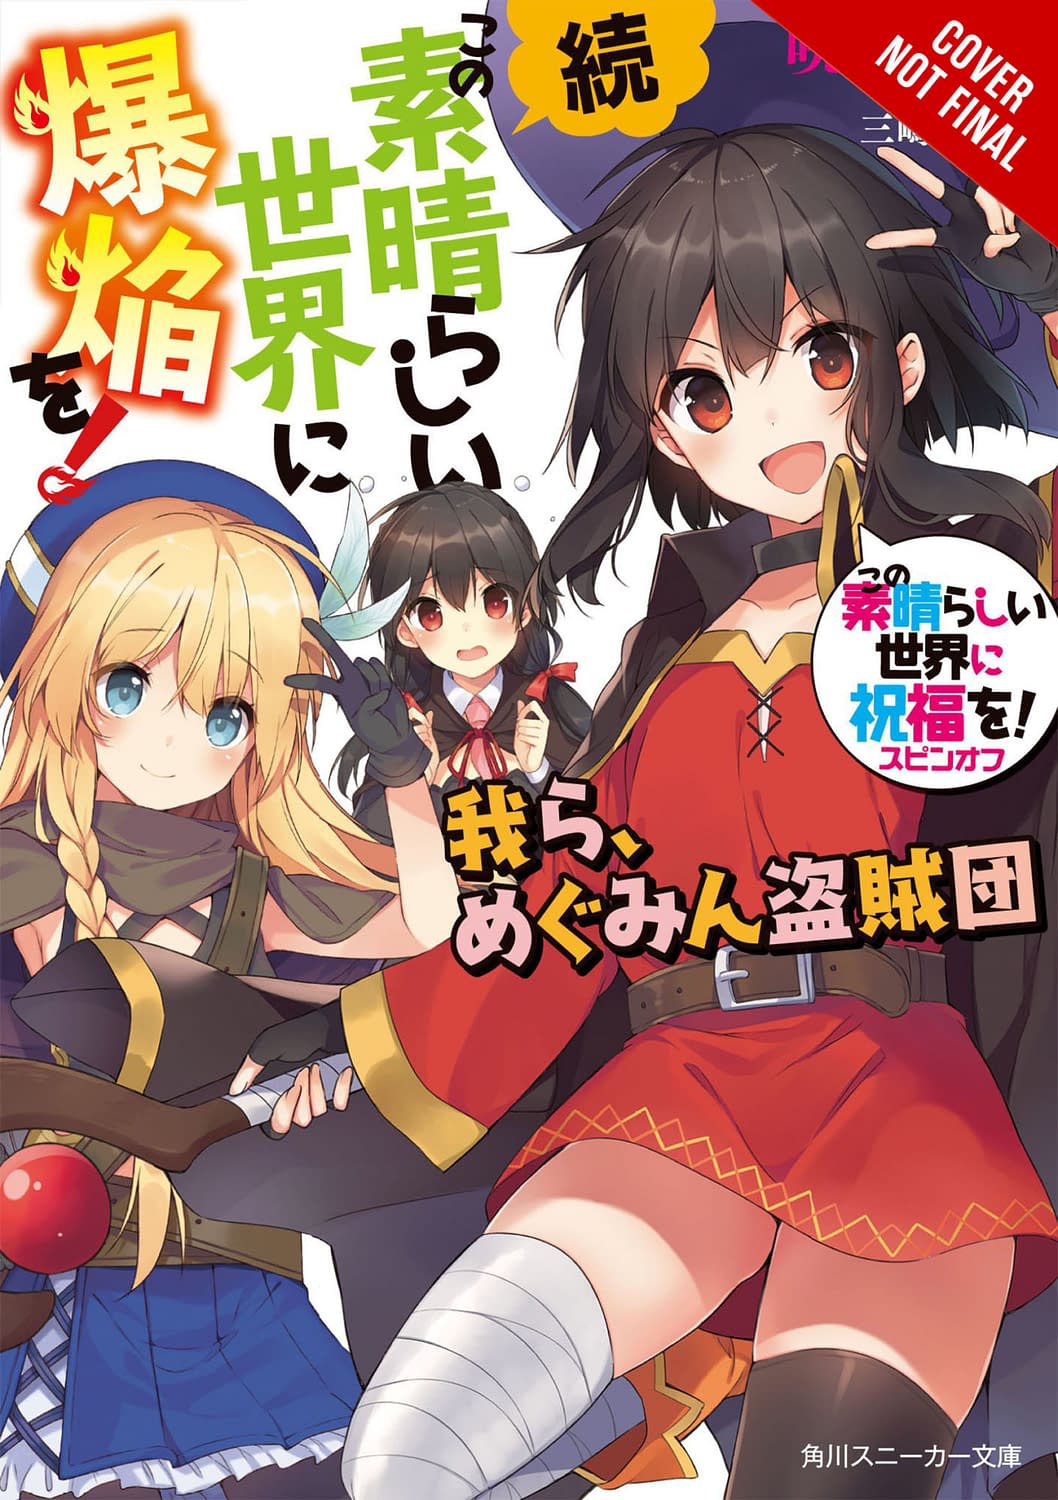 Yen Press Announces New Manga And Light Novel Titles For August 2020 - anime thighs roblox id code june 2020